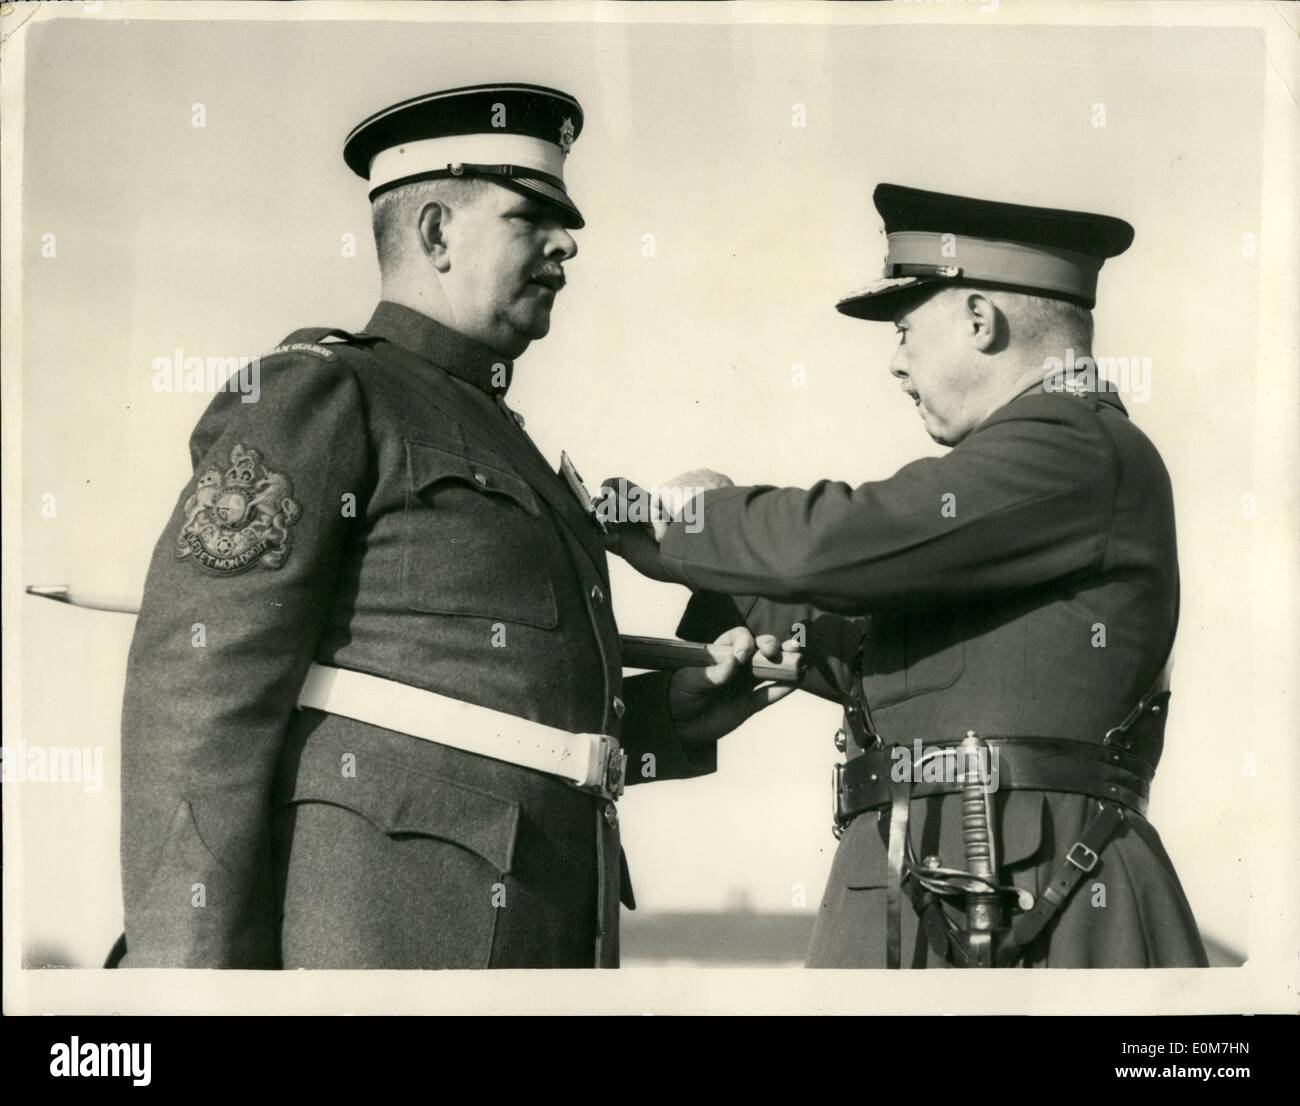 Nov. 11, 1953 - RSM Brittain Receives award: Regimental Sergeant Ronald Brittain, Coldtsrem Guards, owner of ''the loudest voice in the British Army'' today received a bar to his long Service and Goal conduct Medal. He has been in the Army 56 years. The presentation was made by Major General E.S.B. Gaffney, GOC Aldershot Wistrict at a passing out parade at Mons Officer Cadet School, Aldershot. Photo shows RSM Ronald Brittain being presented with his award by Major General E.S.B. Gaffney at Aldershot today. Stock Photo